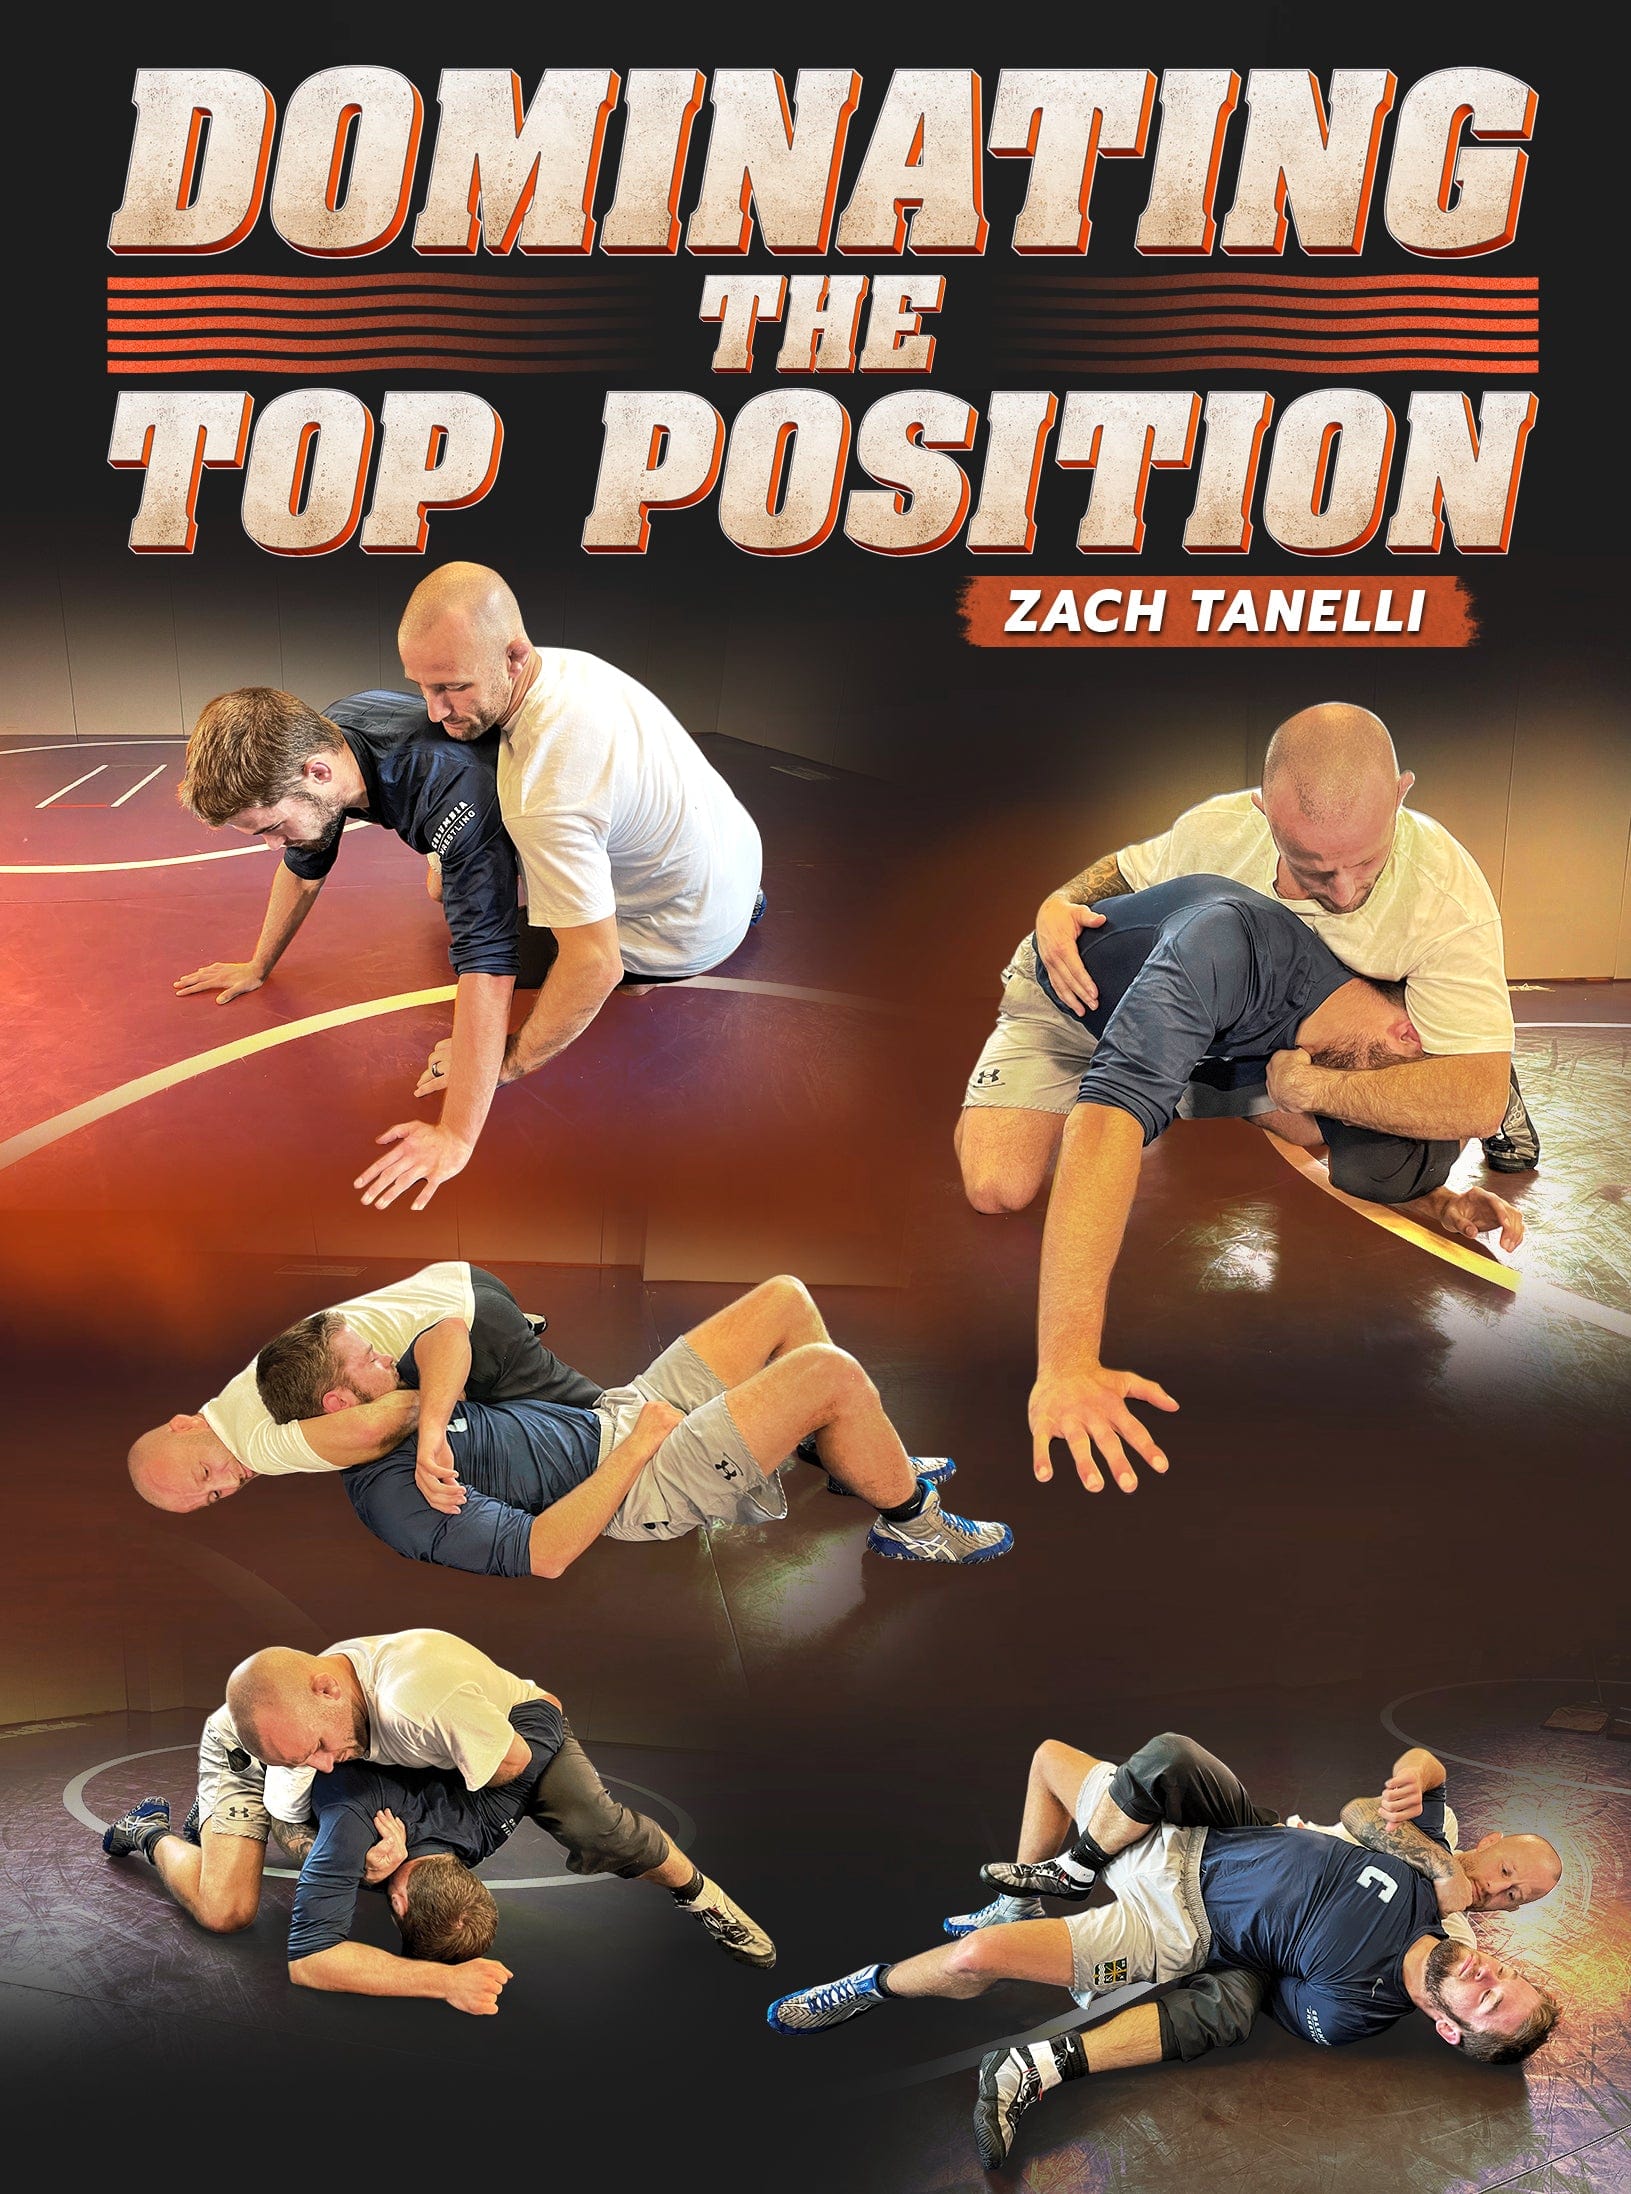 Dominating The top Position by Zach Tanelli - Fanatic Wrestling